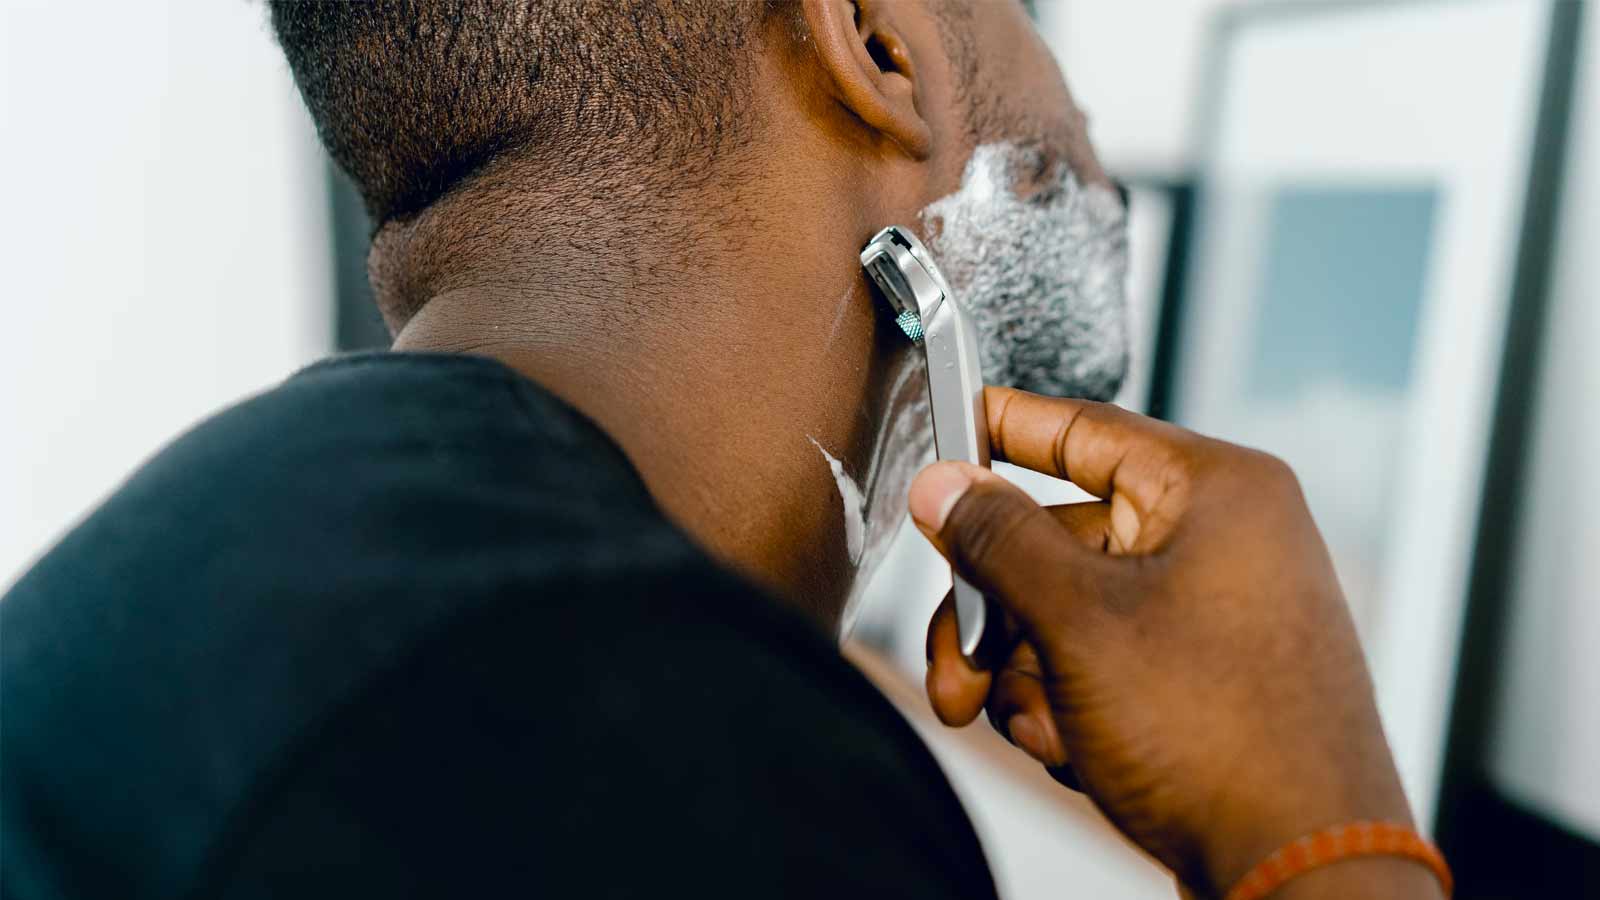 Close-up of person of color shaving their face